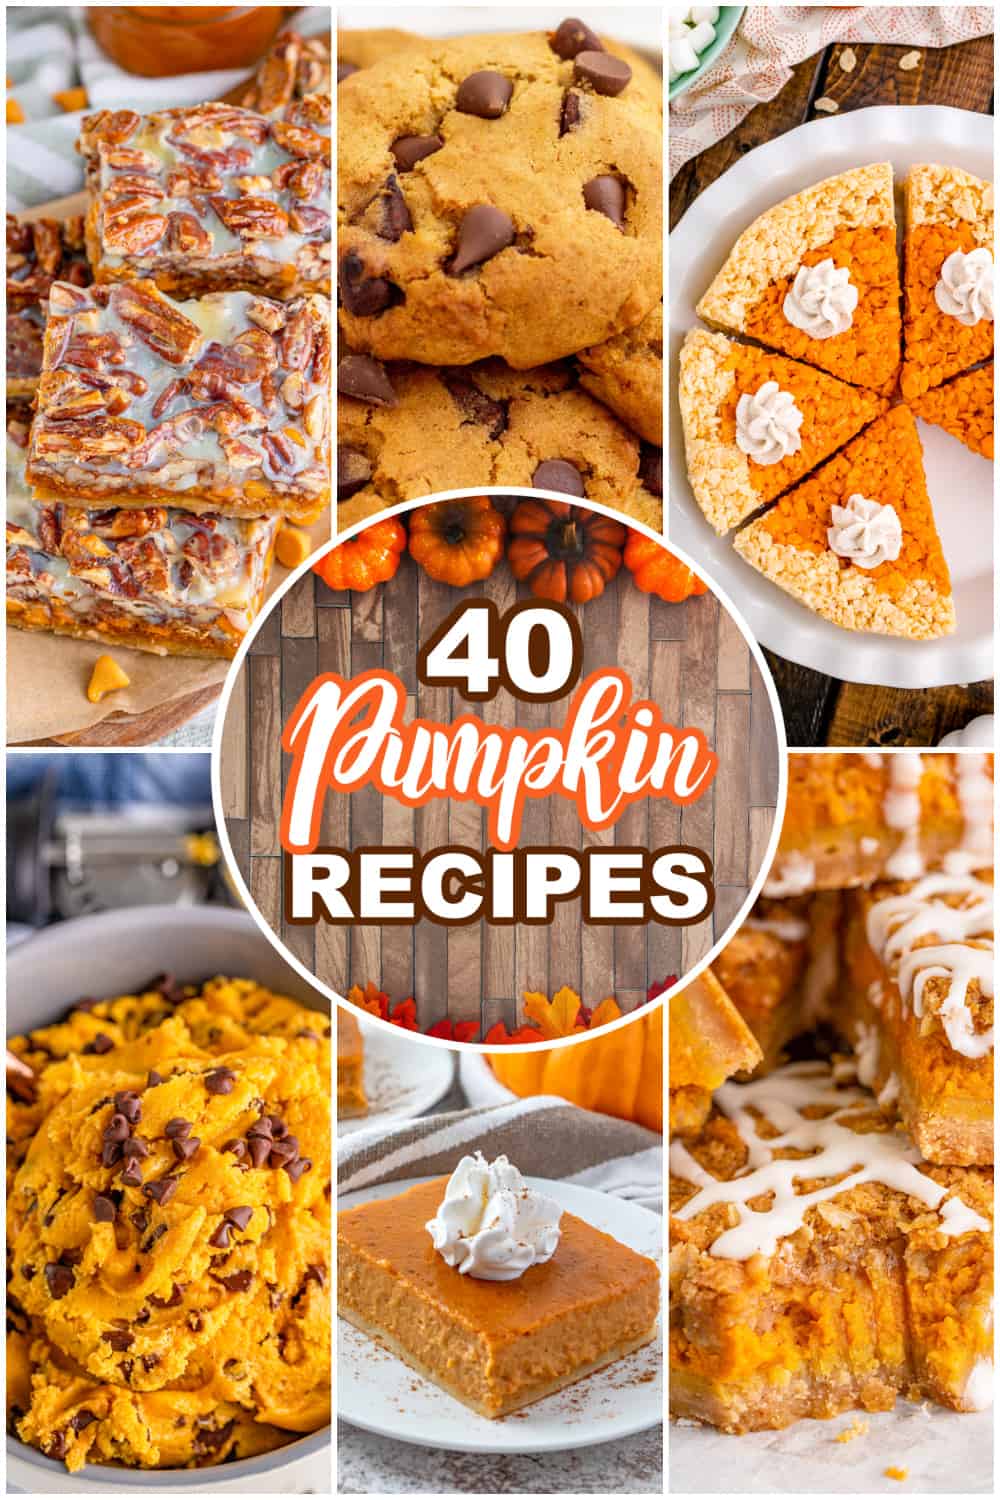 a collage of 6 pumpkin recipe photos with text on the collage that says "40 pumpkin recipes". 